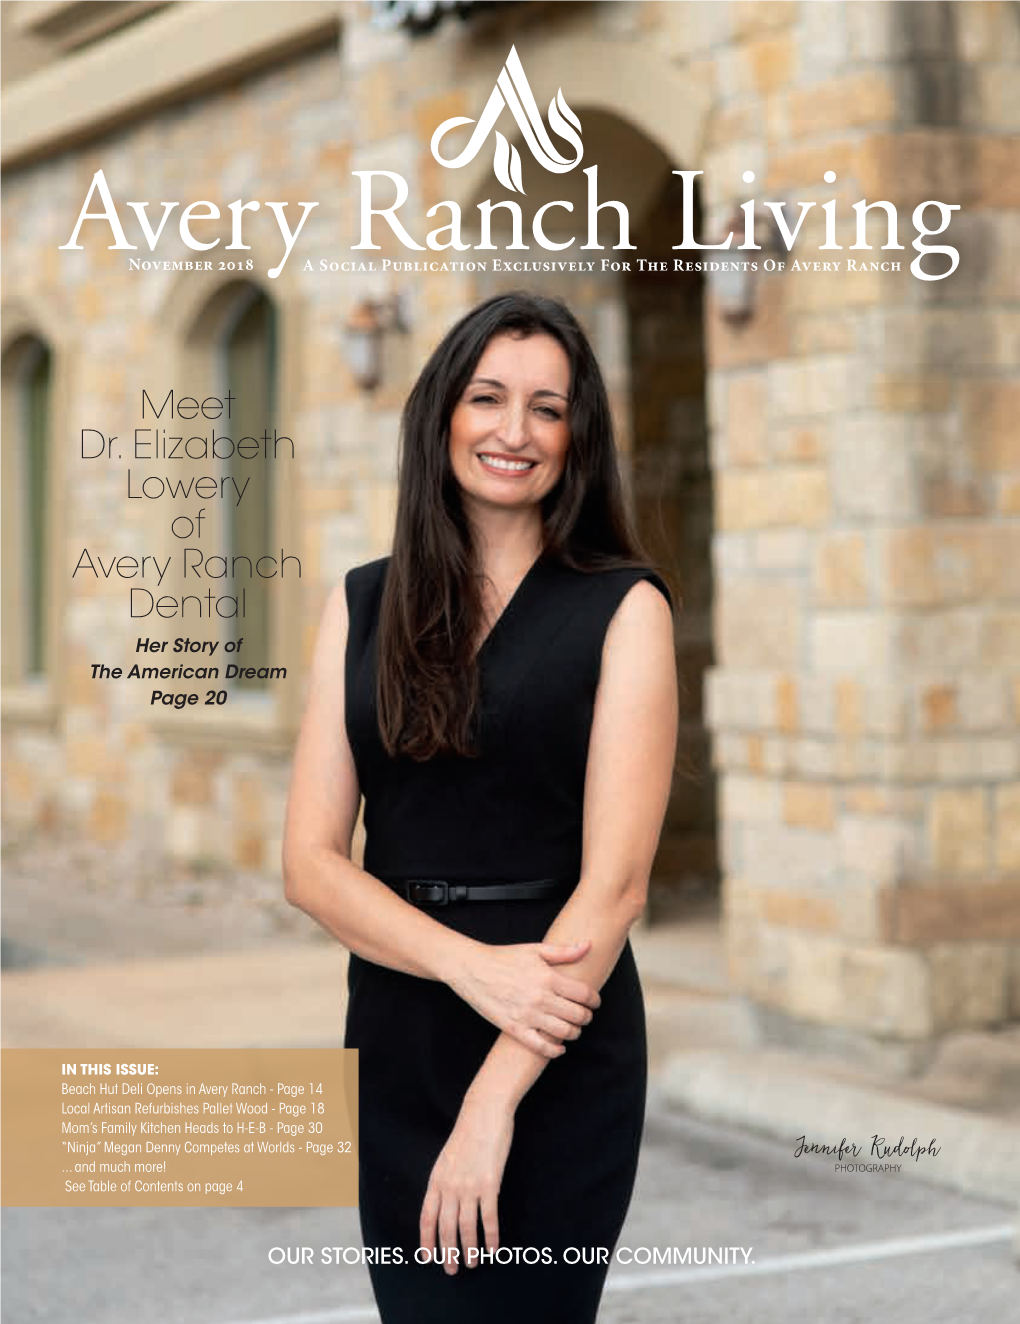 Meet Dr. Elizabeth Lowery of Avery Ranch Dental Her Story of the American Dream Page 20